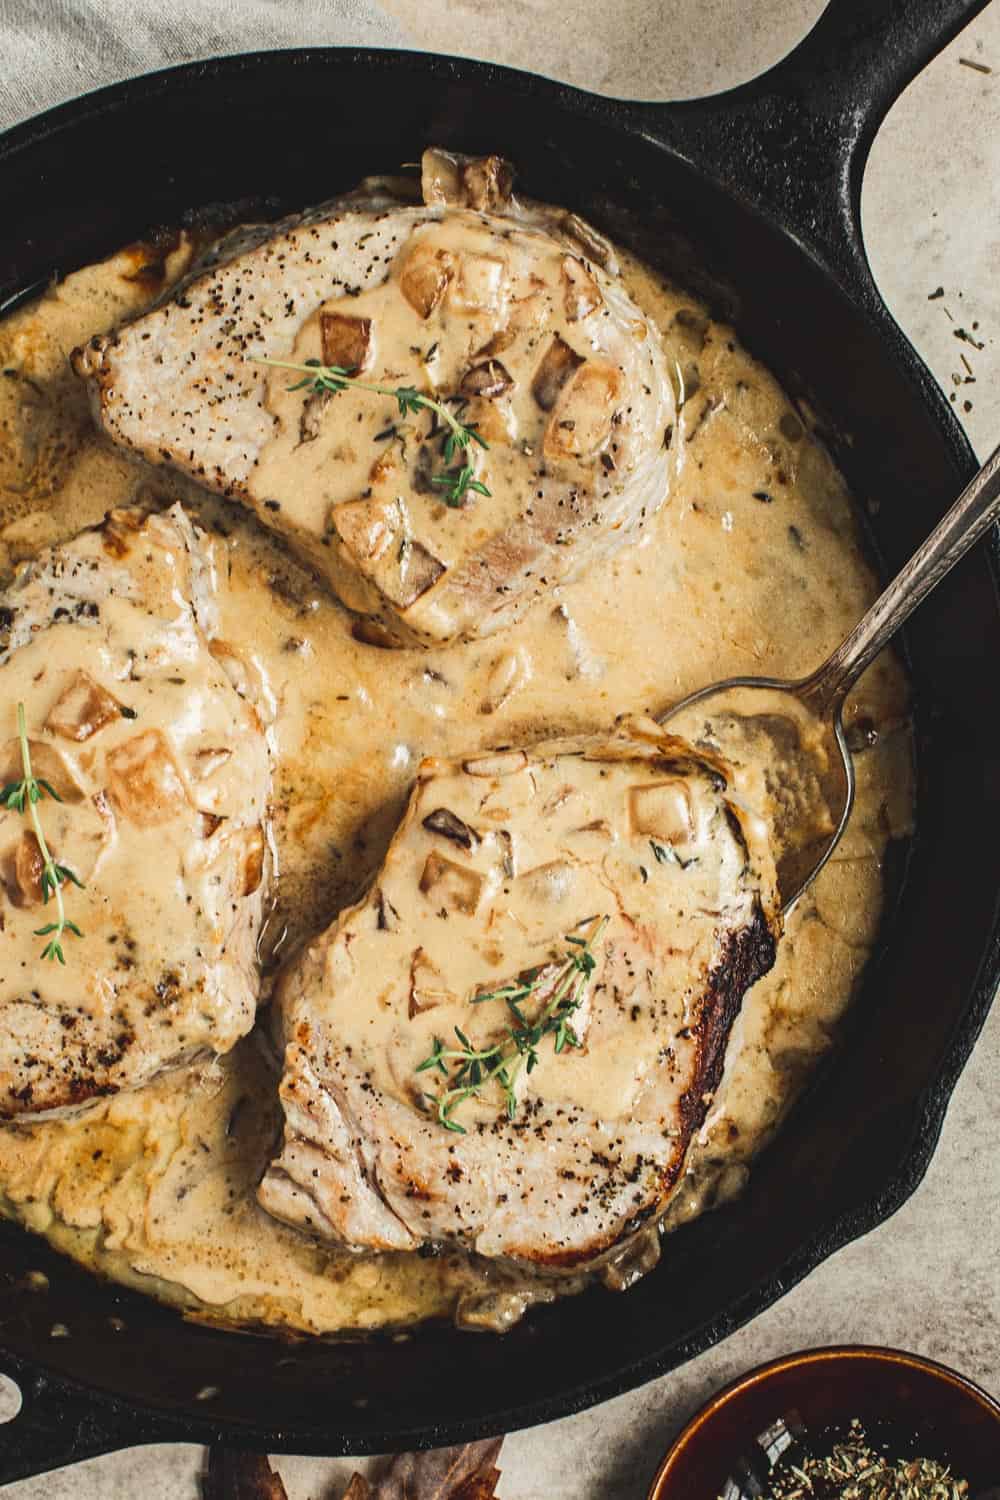 Pork chopes in a creamy apple cider sauce topped with fresh thyme in an iron skillet.